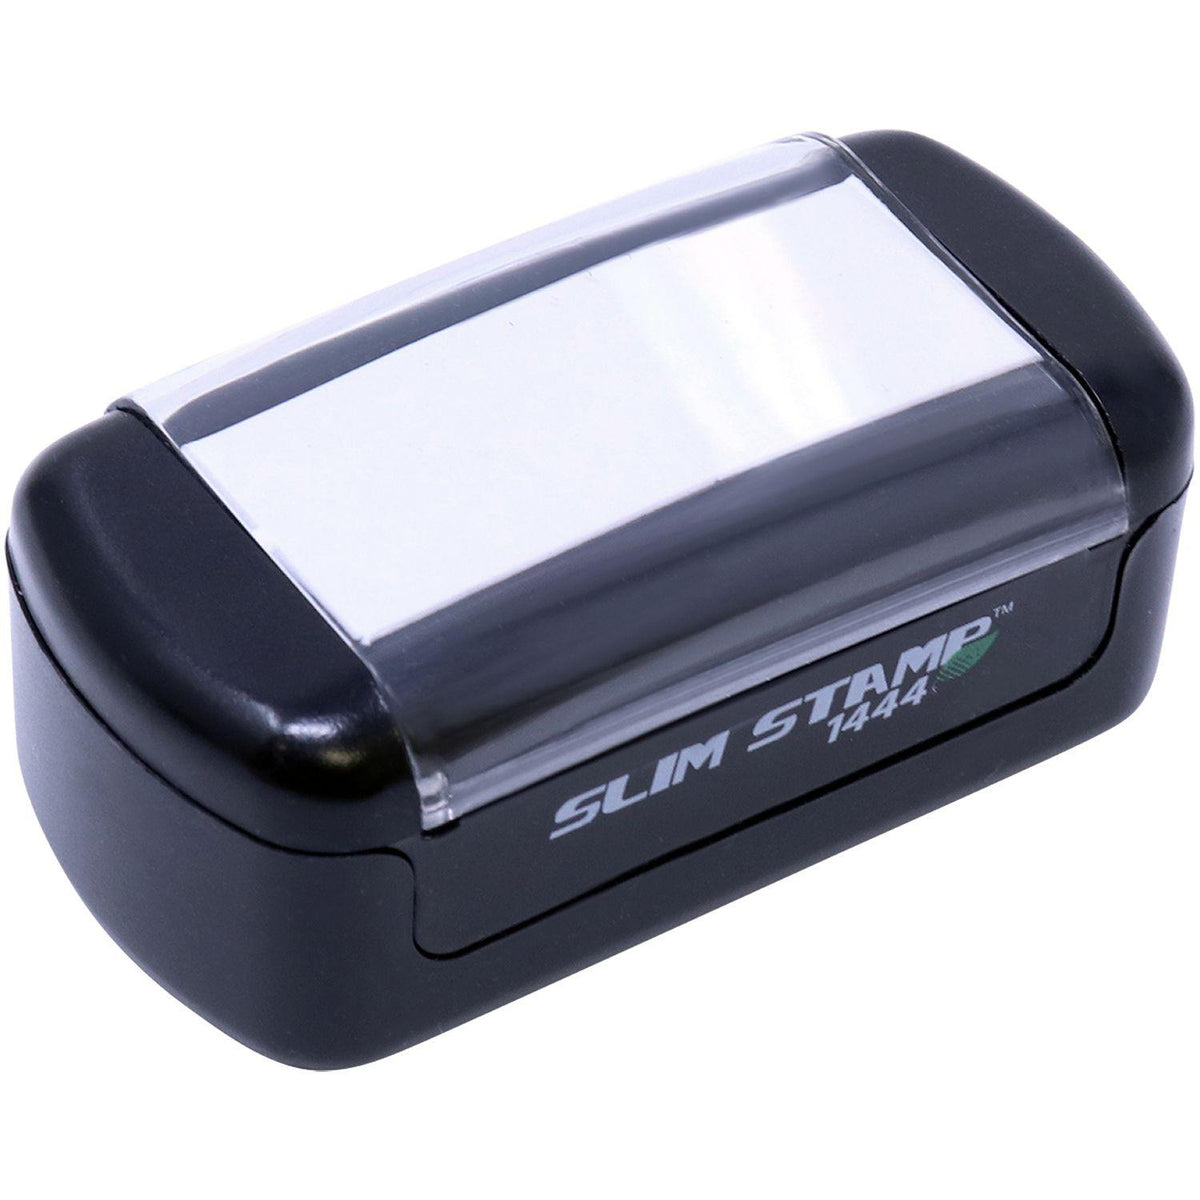 Top Down View of Slim Pre Inked Stop Payment Stamp